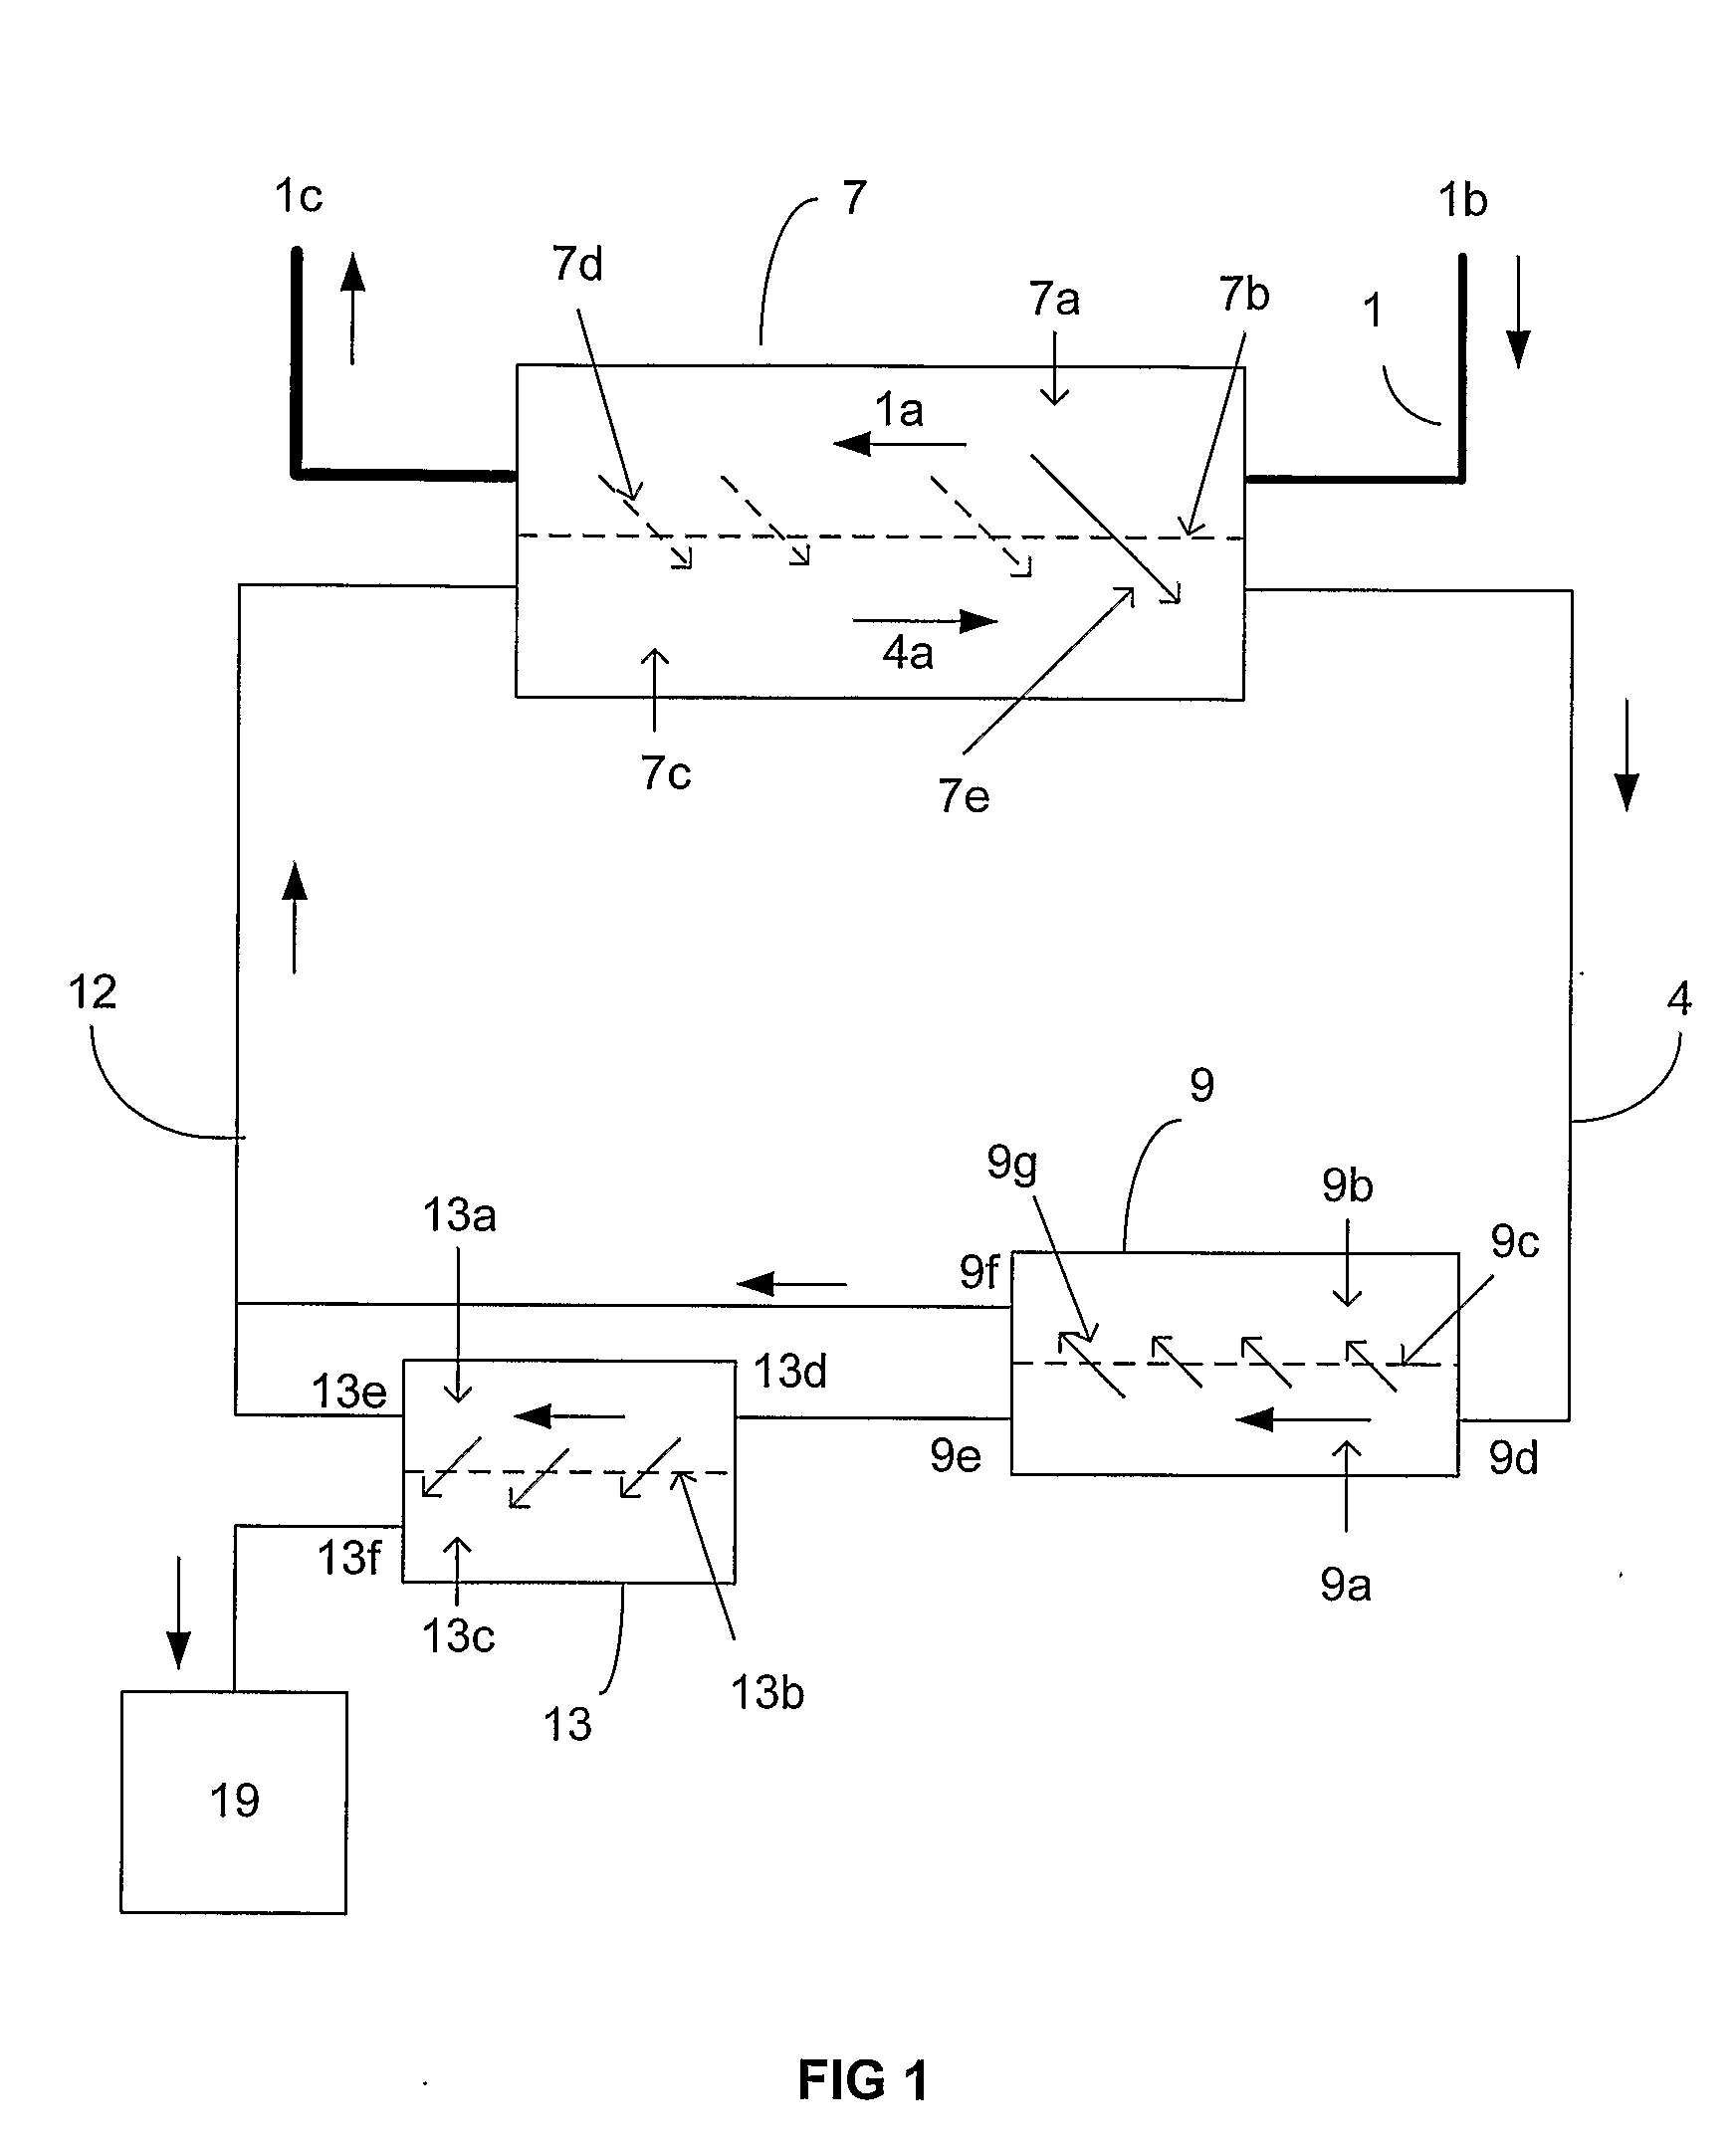 System and Method for Regeneration of a Fluid